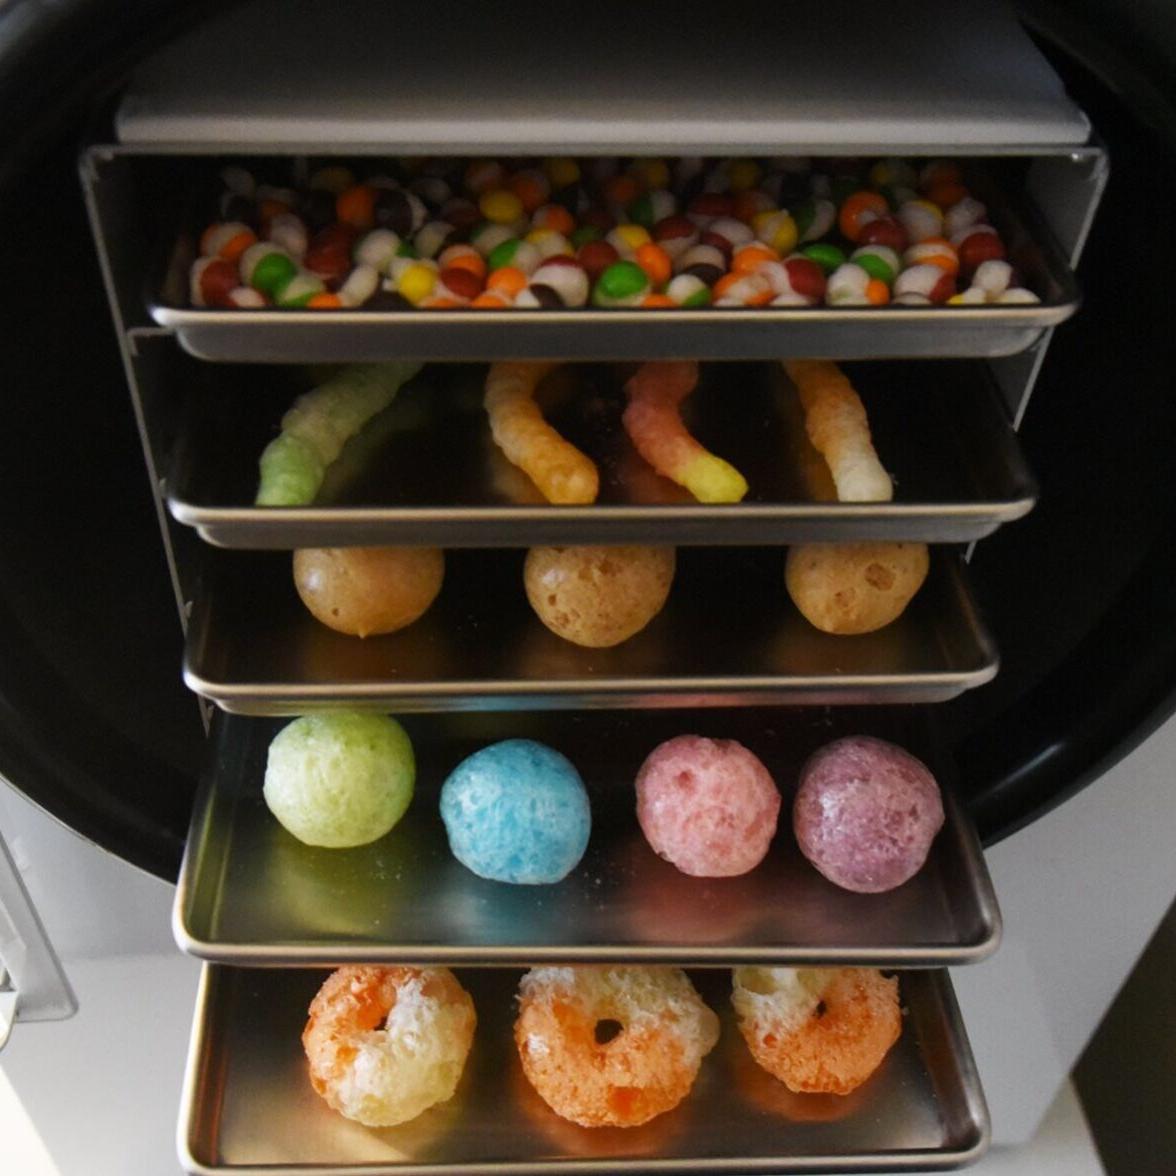 We Dehydrated This Huge Gummy Sushi Set, Candy in the Dehydrator Machine